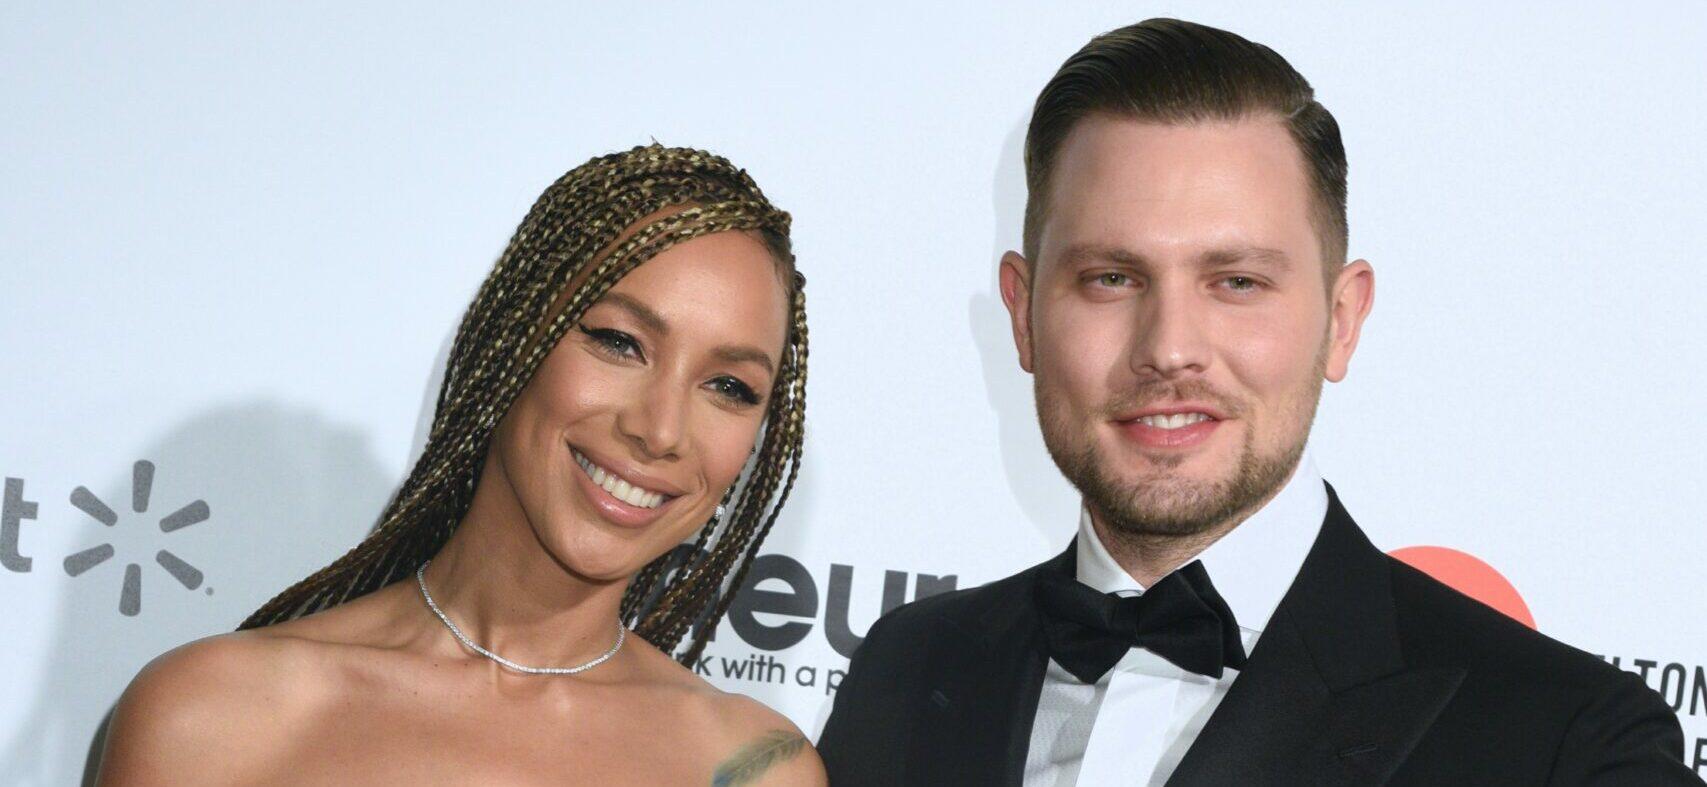 Leona Lewis and husband Dennis Jauch at CA: Elton John AIDS Foundation Oscar Viewing Party